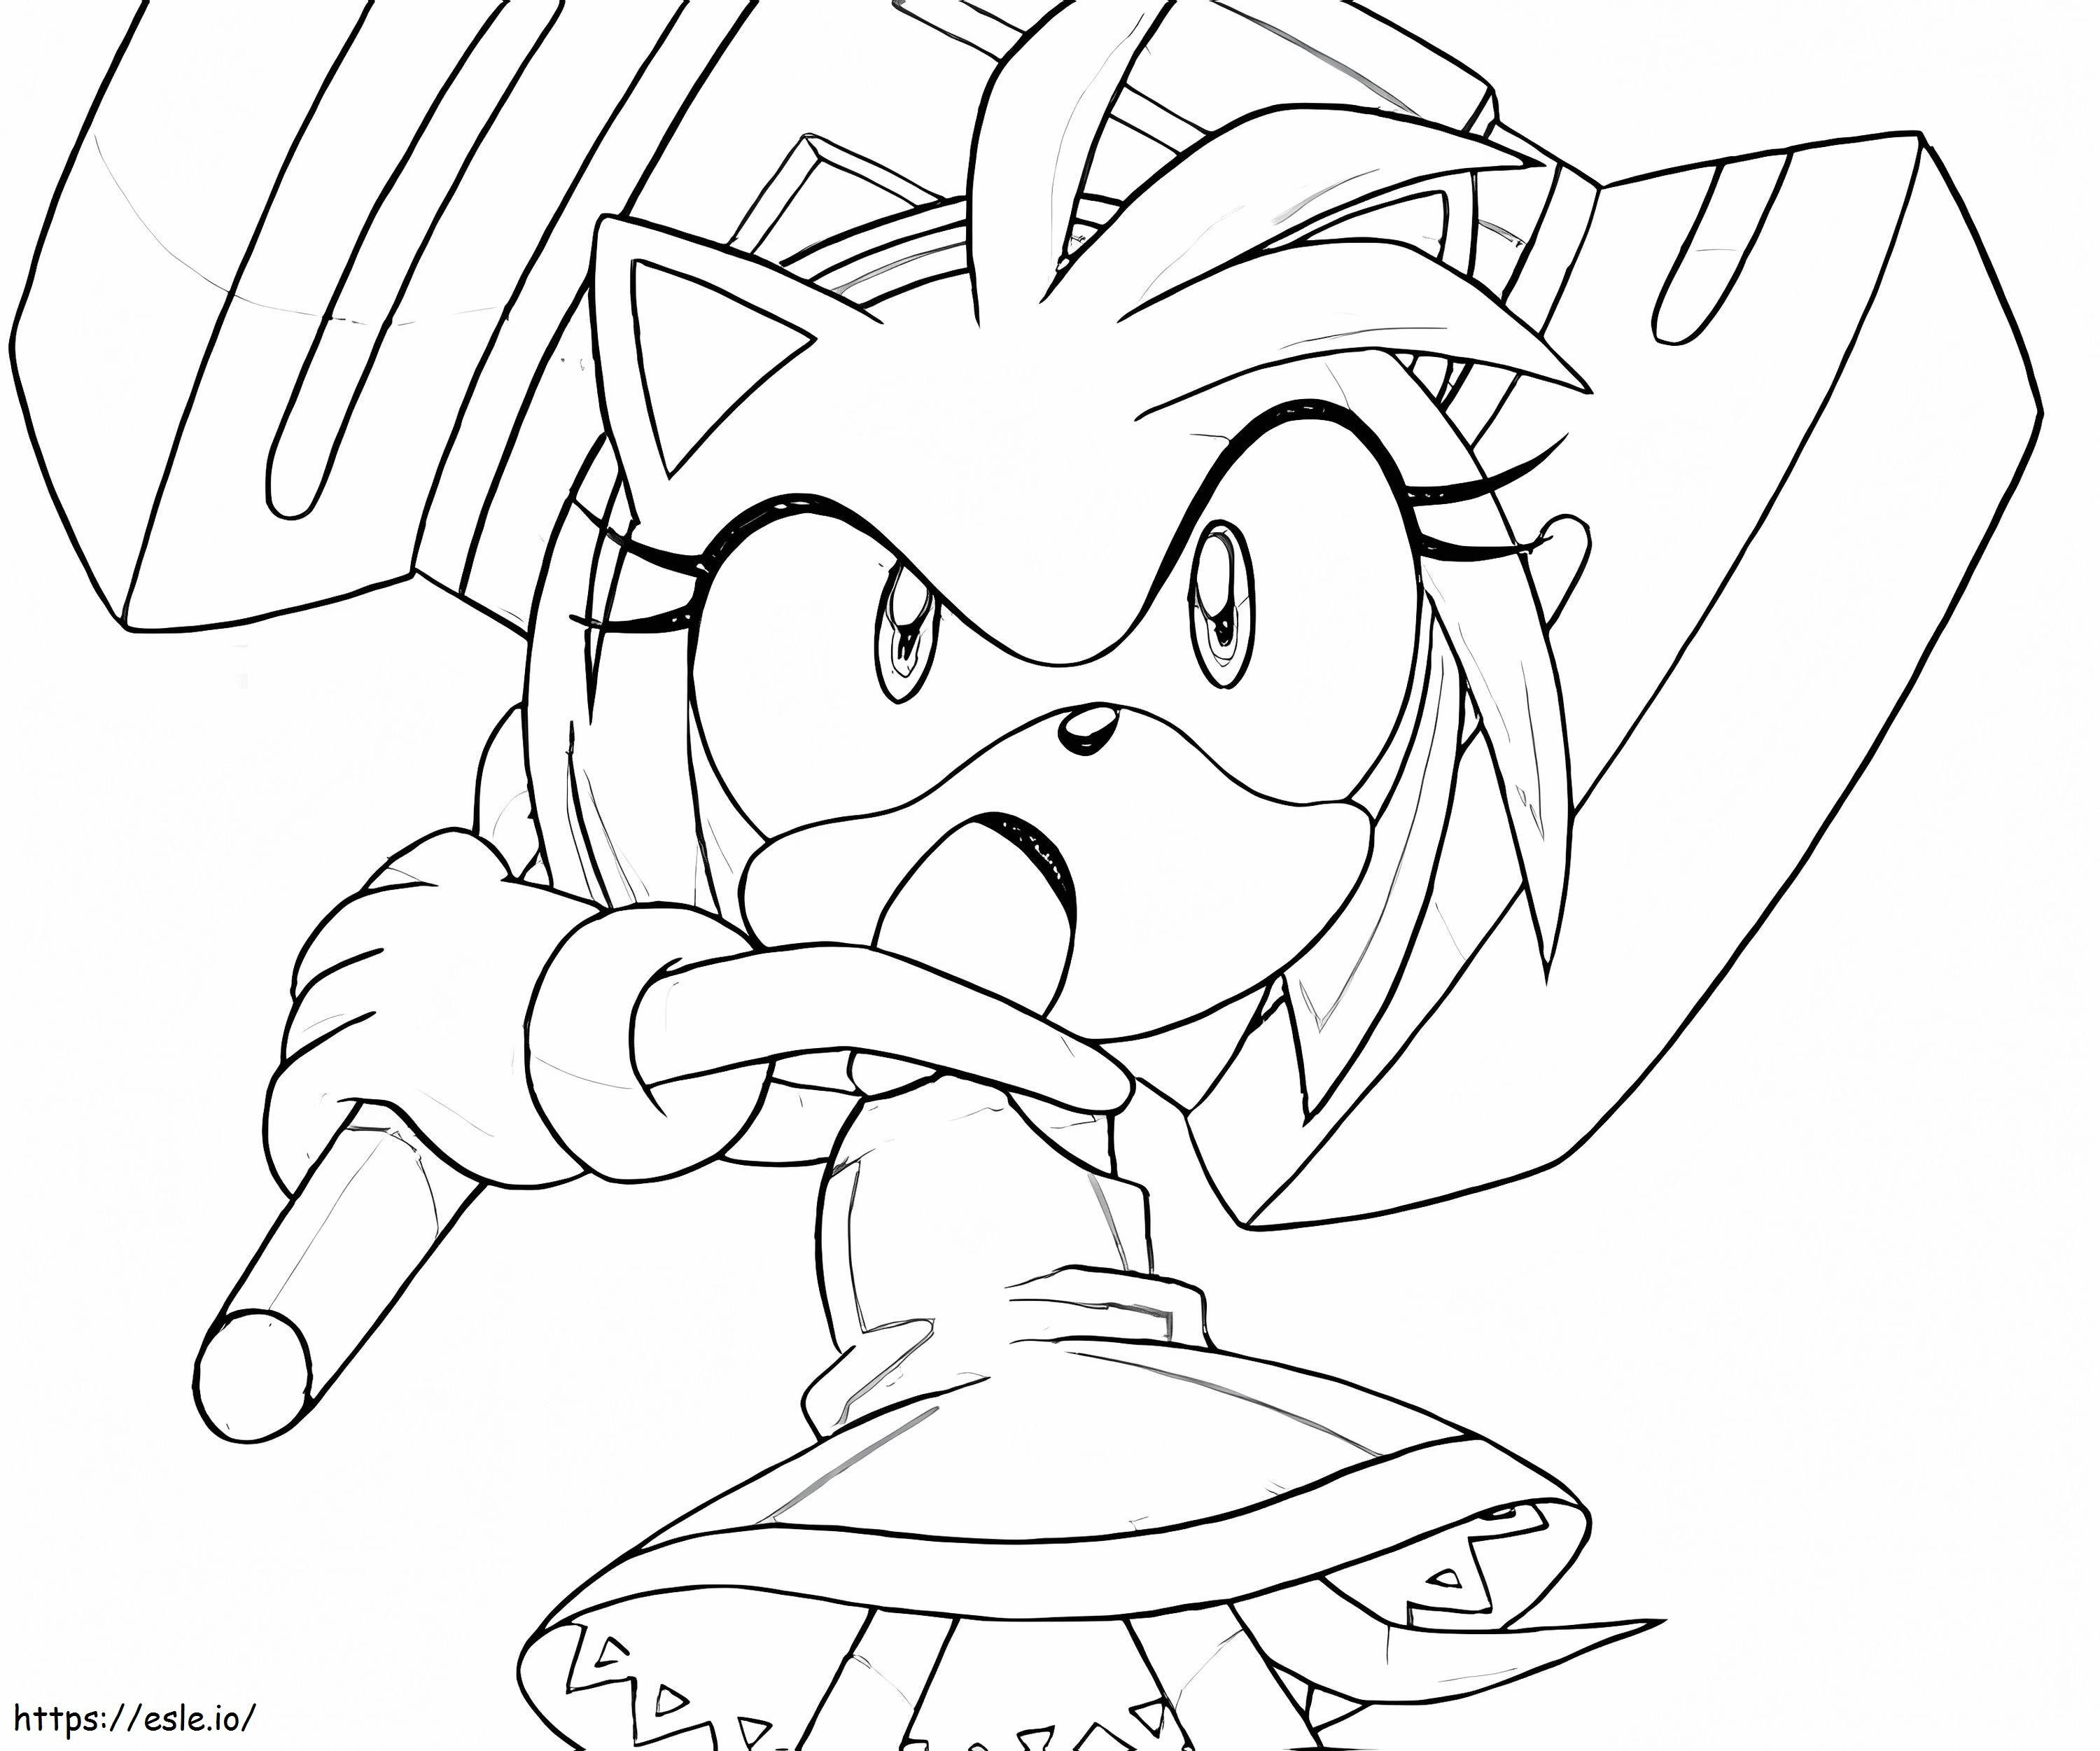 Angry Amy Rose coloring page